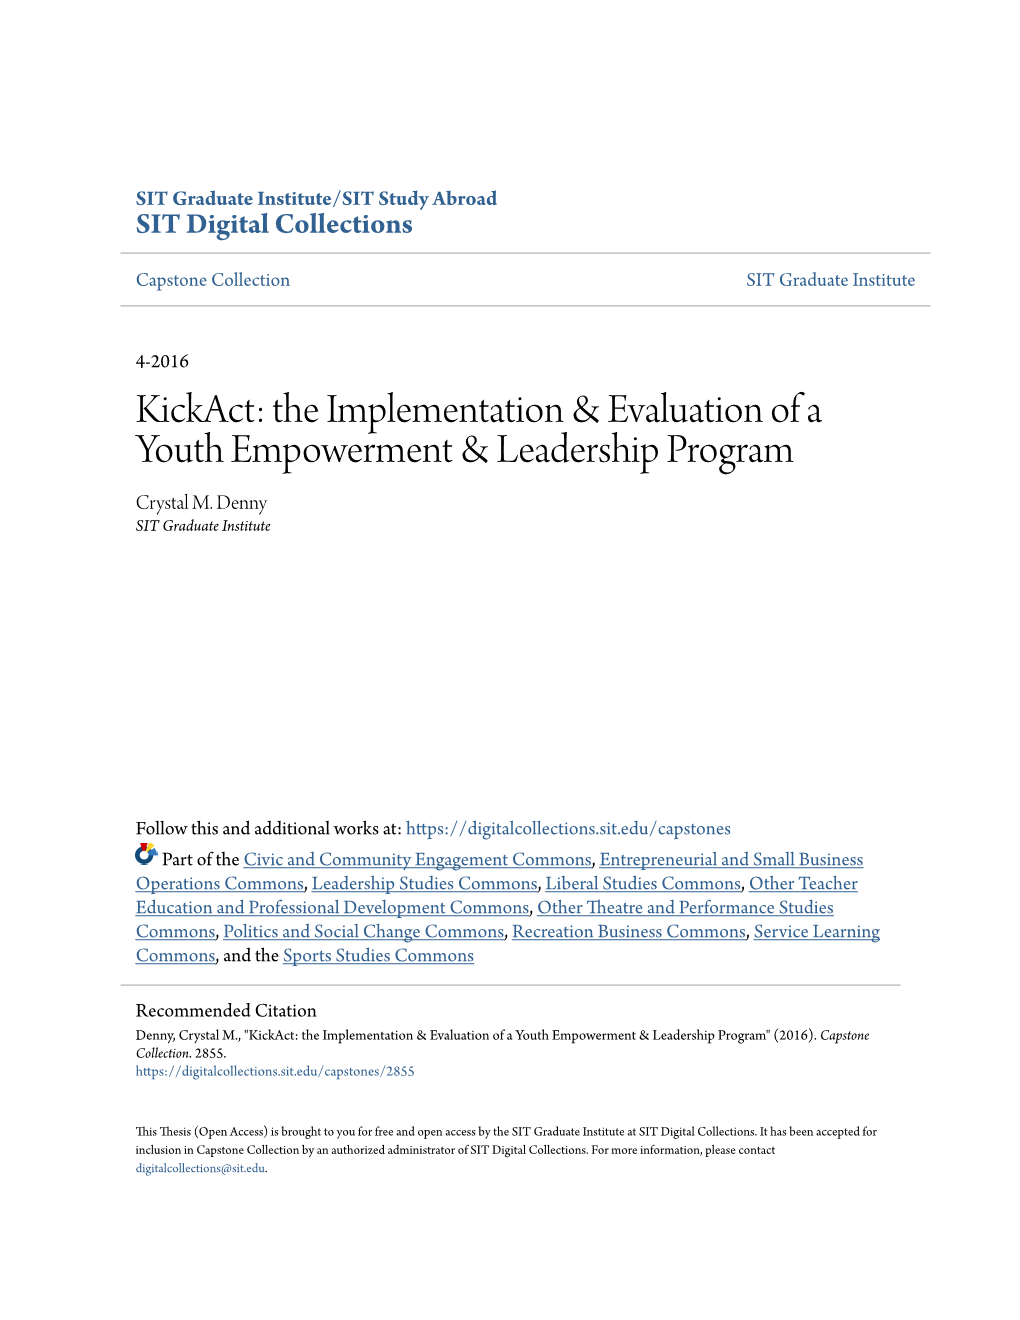 The Implementation & Evaluation of a Youth Empowerment & Leadership